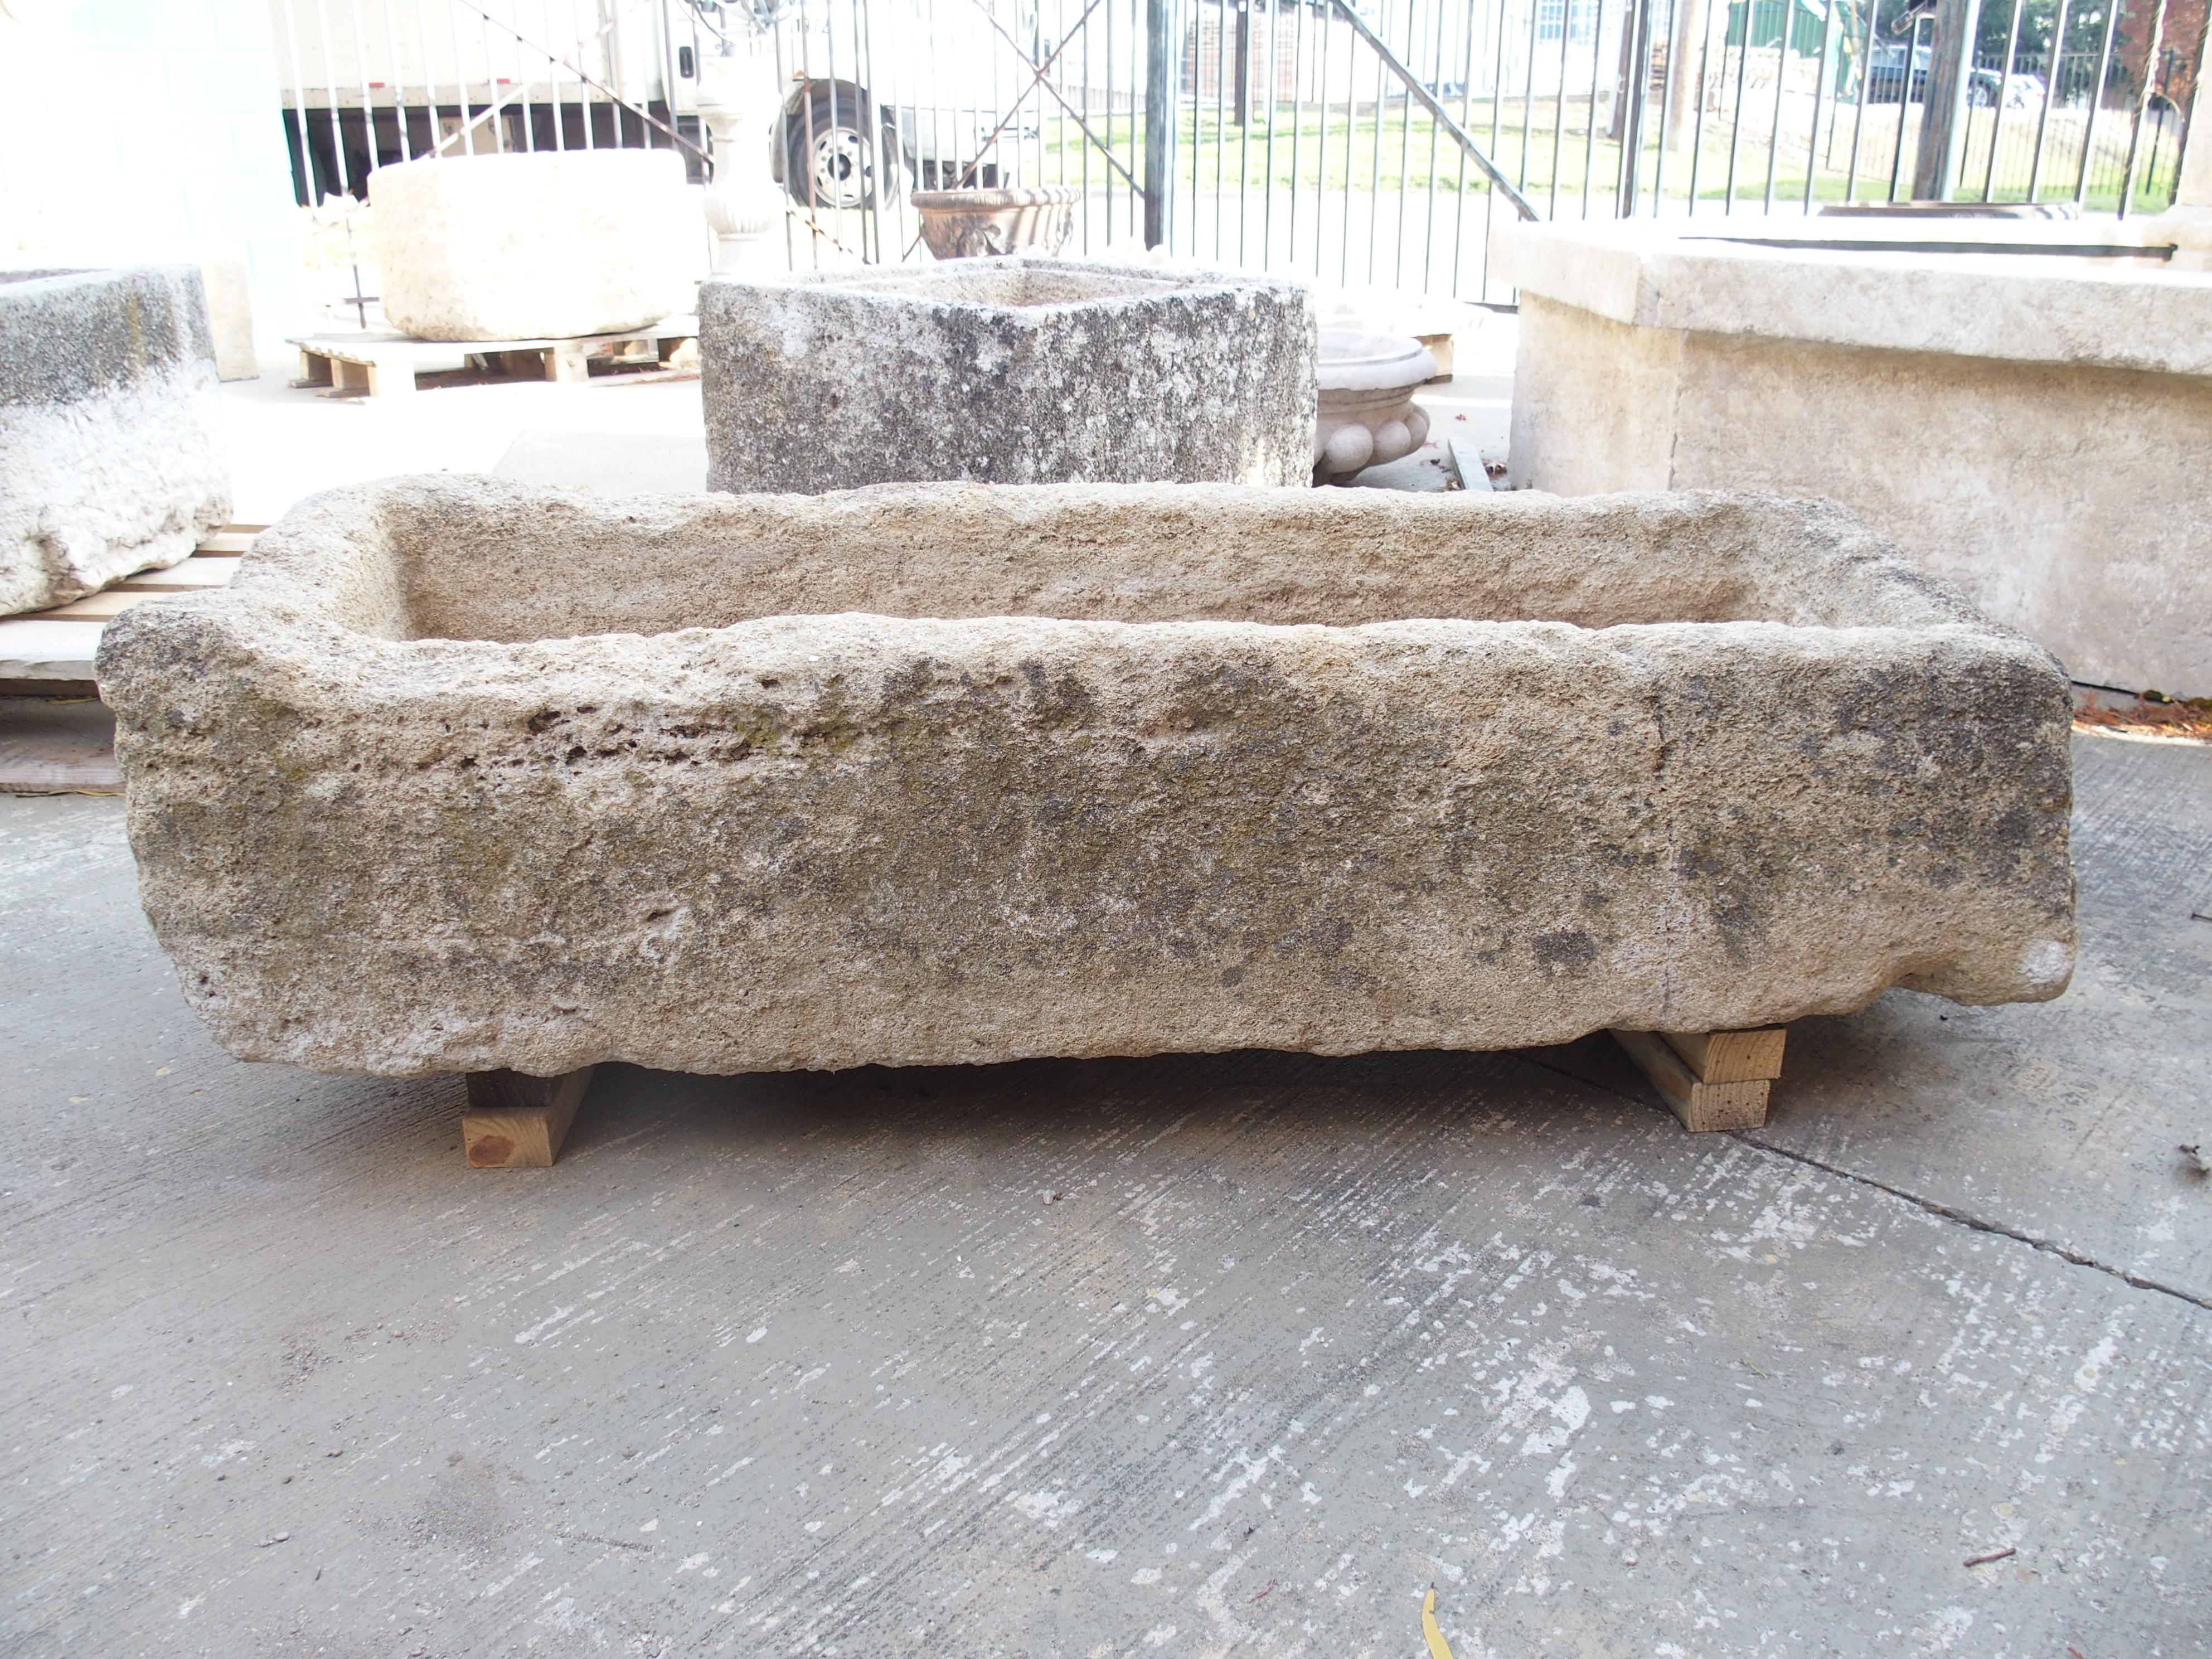 Dating to the early 1800s, this limestone farm trough from France has been hand-carved using a technique known as rough-cut. Artisans use this technique to excavate large amounts of sculpting/carving material before typically using a finer